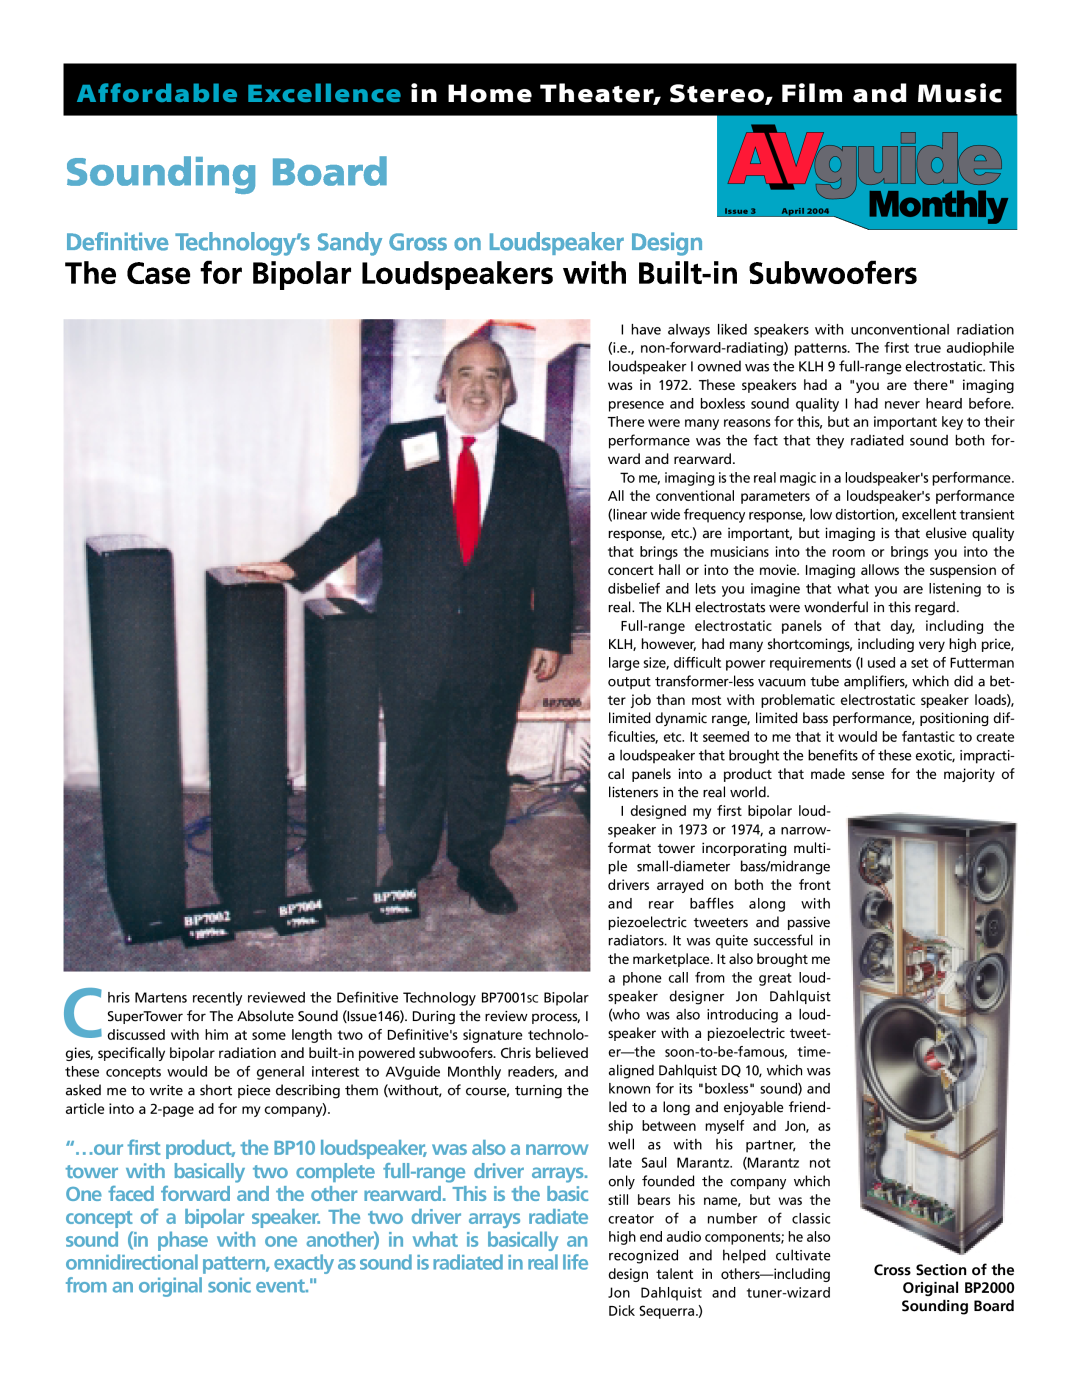 Definitive Technology Subwoofers manual Sounding Board, Issue, April 